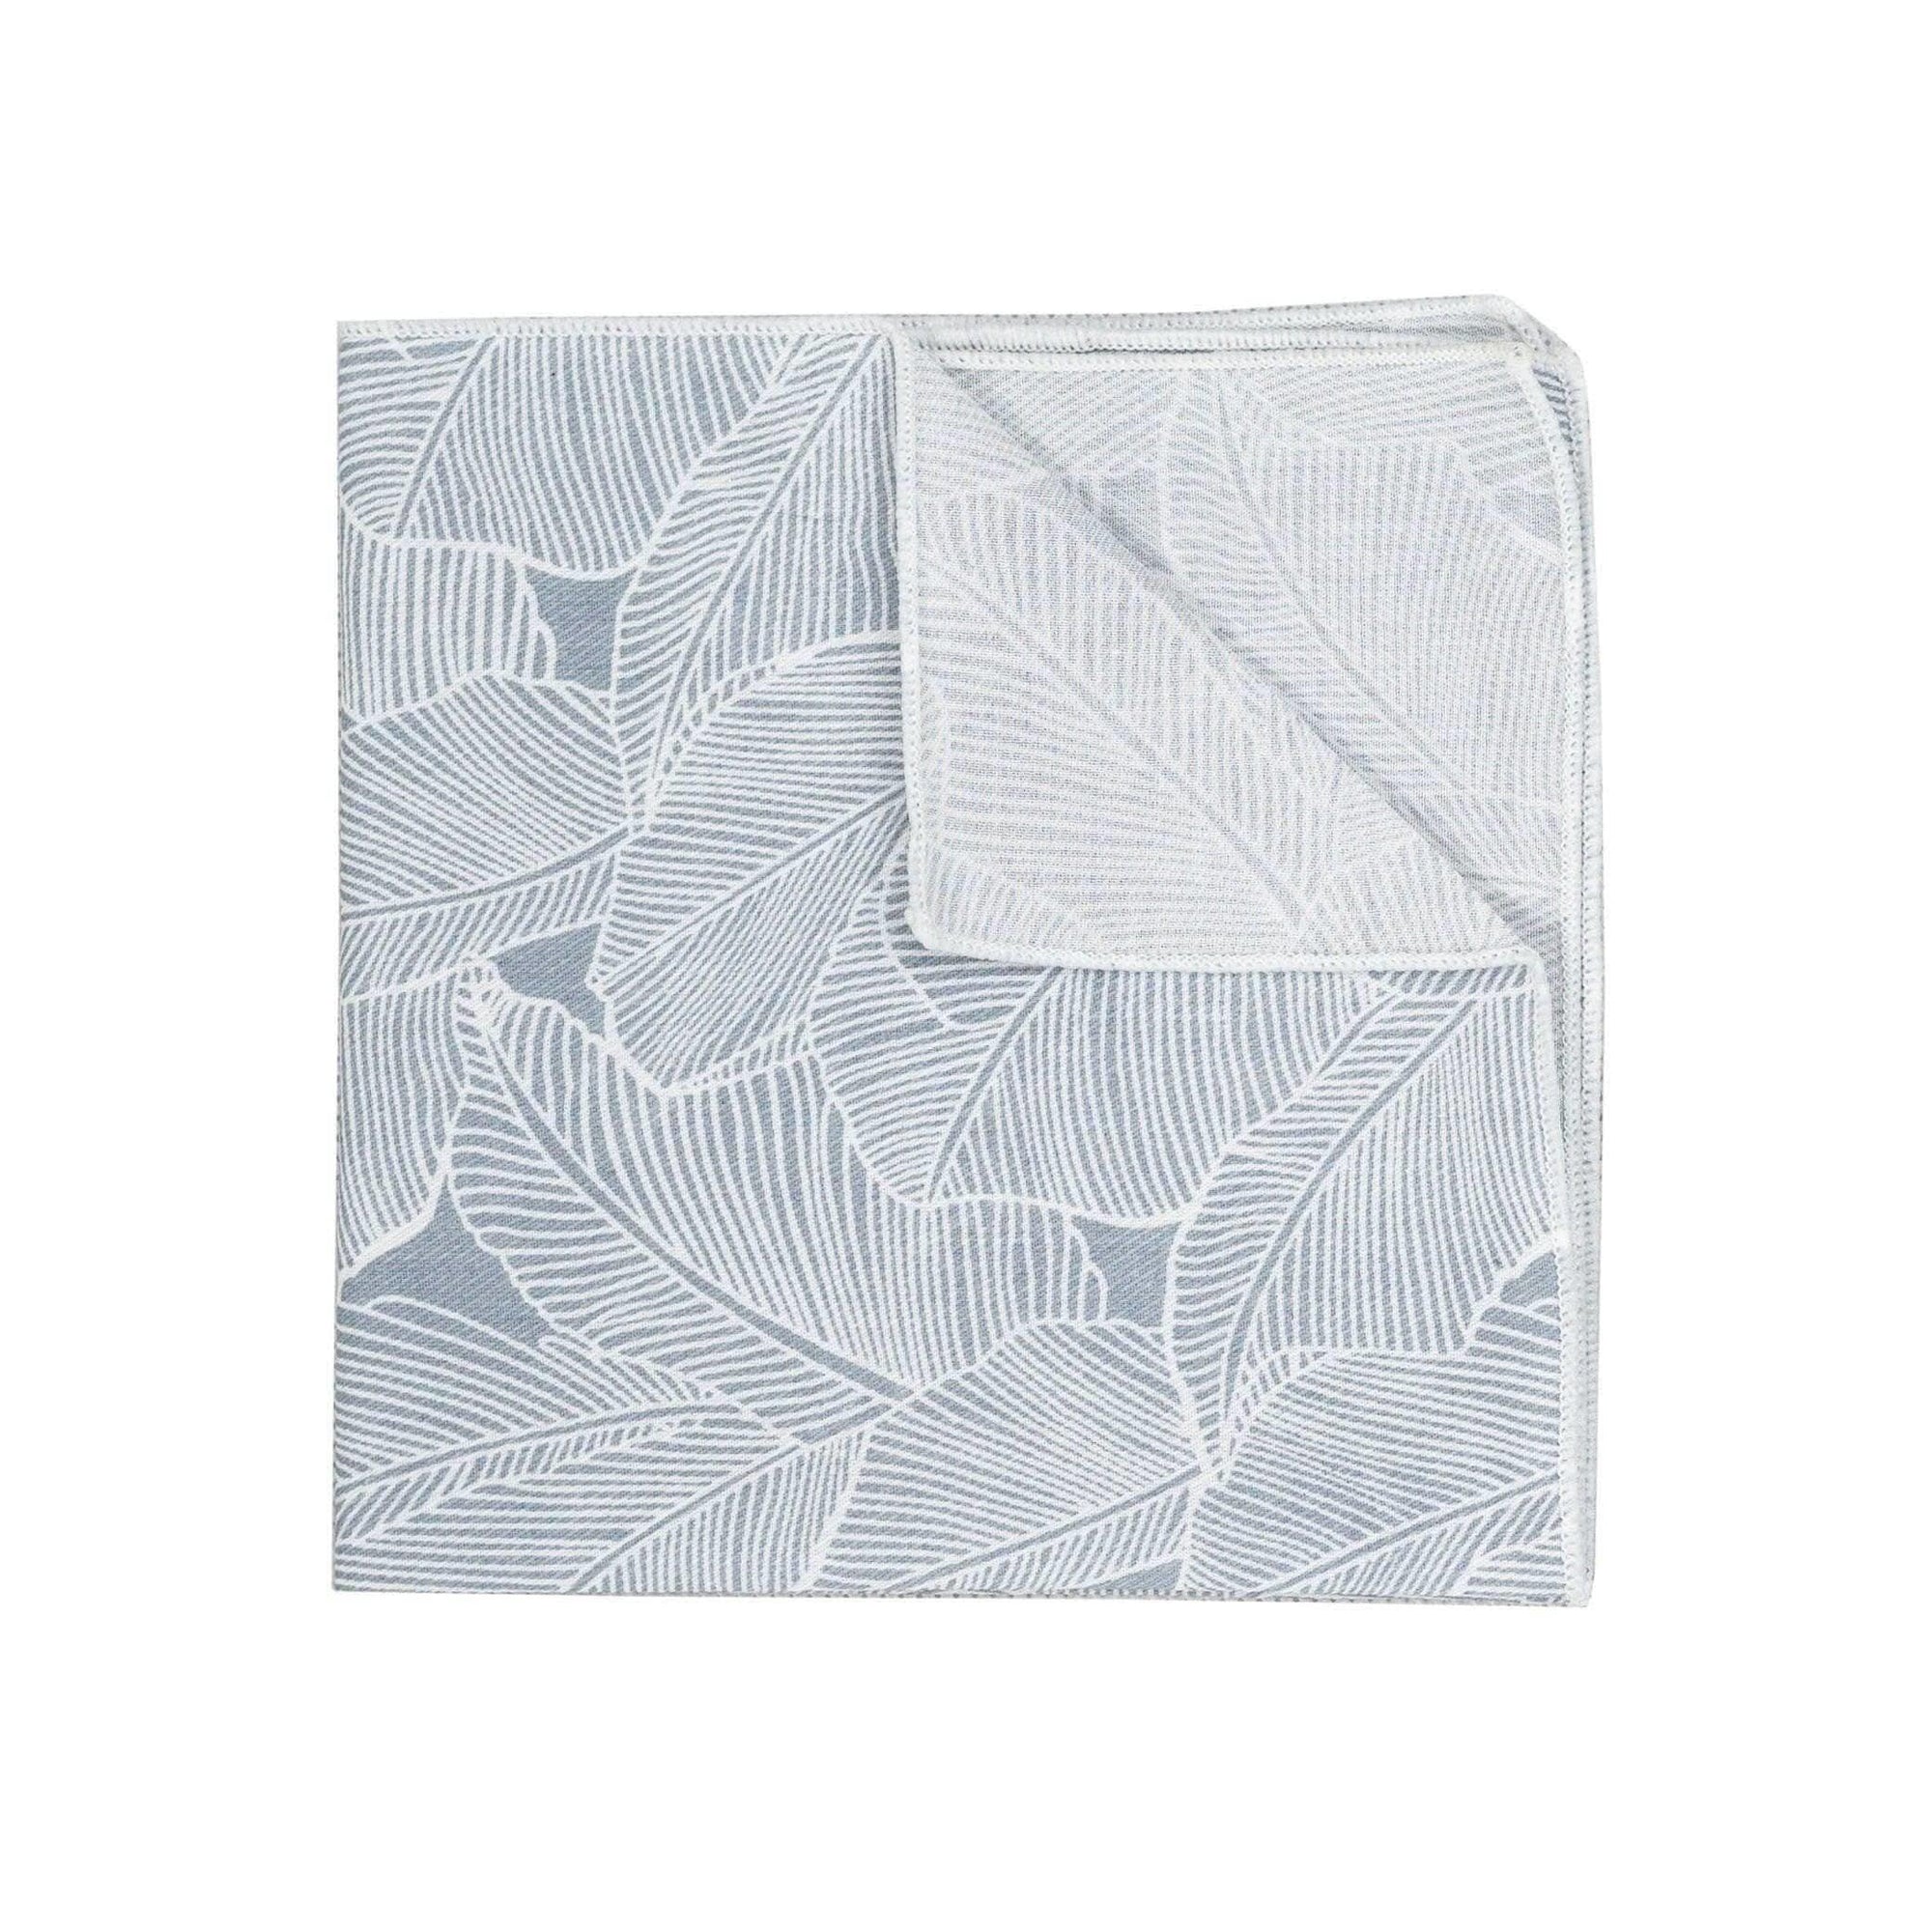 Gray Floral Pocket Square EZRA - MYTIESHOP Mytieshop Gray Floral Pocket Square Material CottonItem Length: 23 cm ( 9 inches)Item Width : 22 cm (8.6 inches) Color: Gray / Grey Great for: Groom Groomsmen Wedding Shoots Formal Prom Fancy Parties Gifts and presents A dashing addition to any outfit. Inspired by the changing leaves of fall, this pocket square is the perfect finishing touch to your look. With a versatile gray color and a modern floral print, it&#39;s perfect for any occasion. Whether you&#39;r